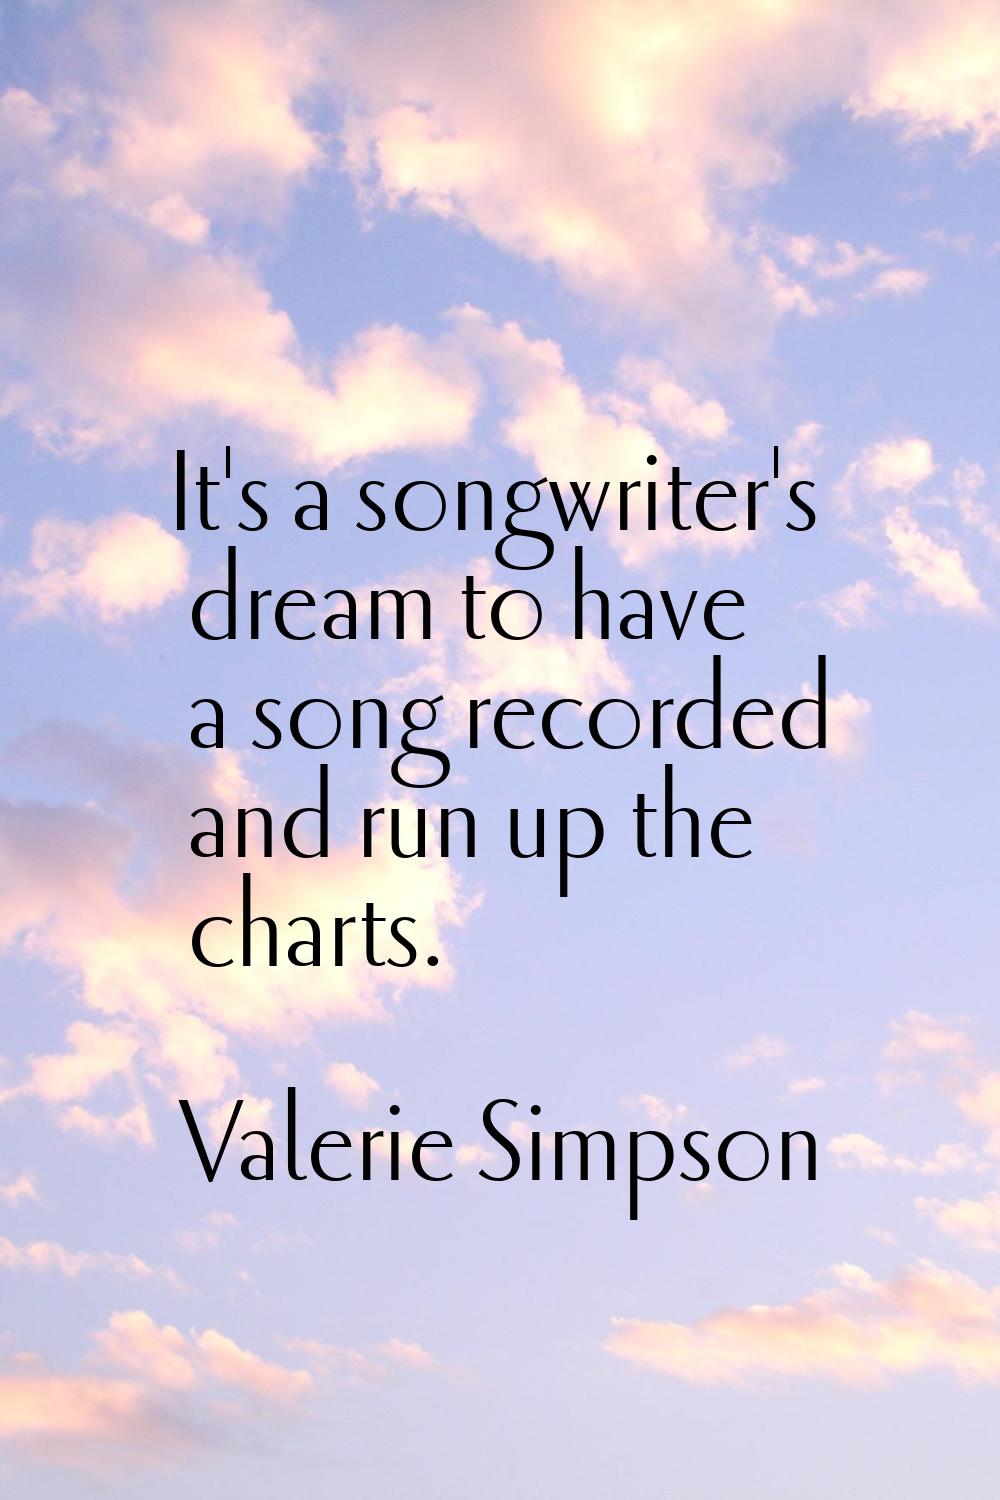 It's a songwriter's dream to have a song recorded and run up the charts.